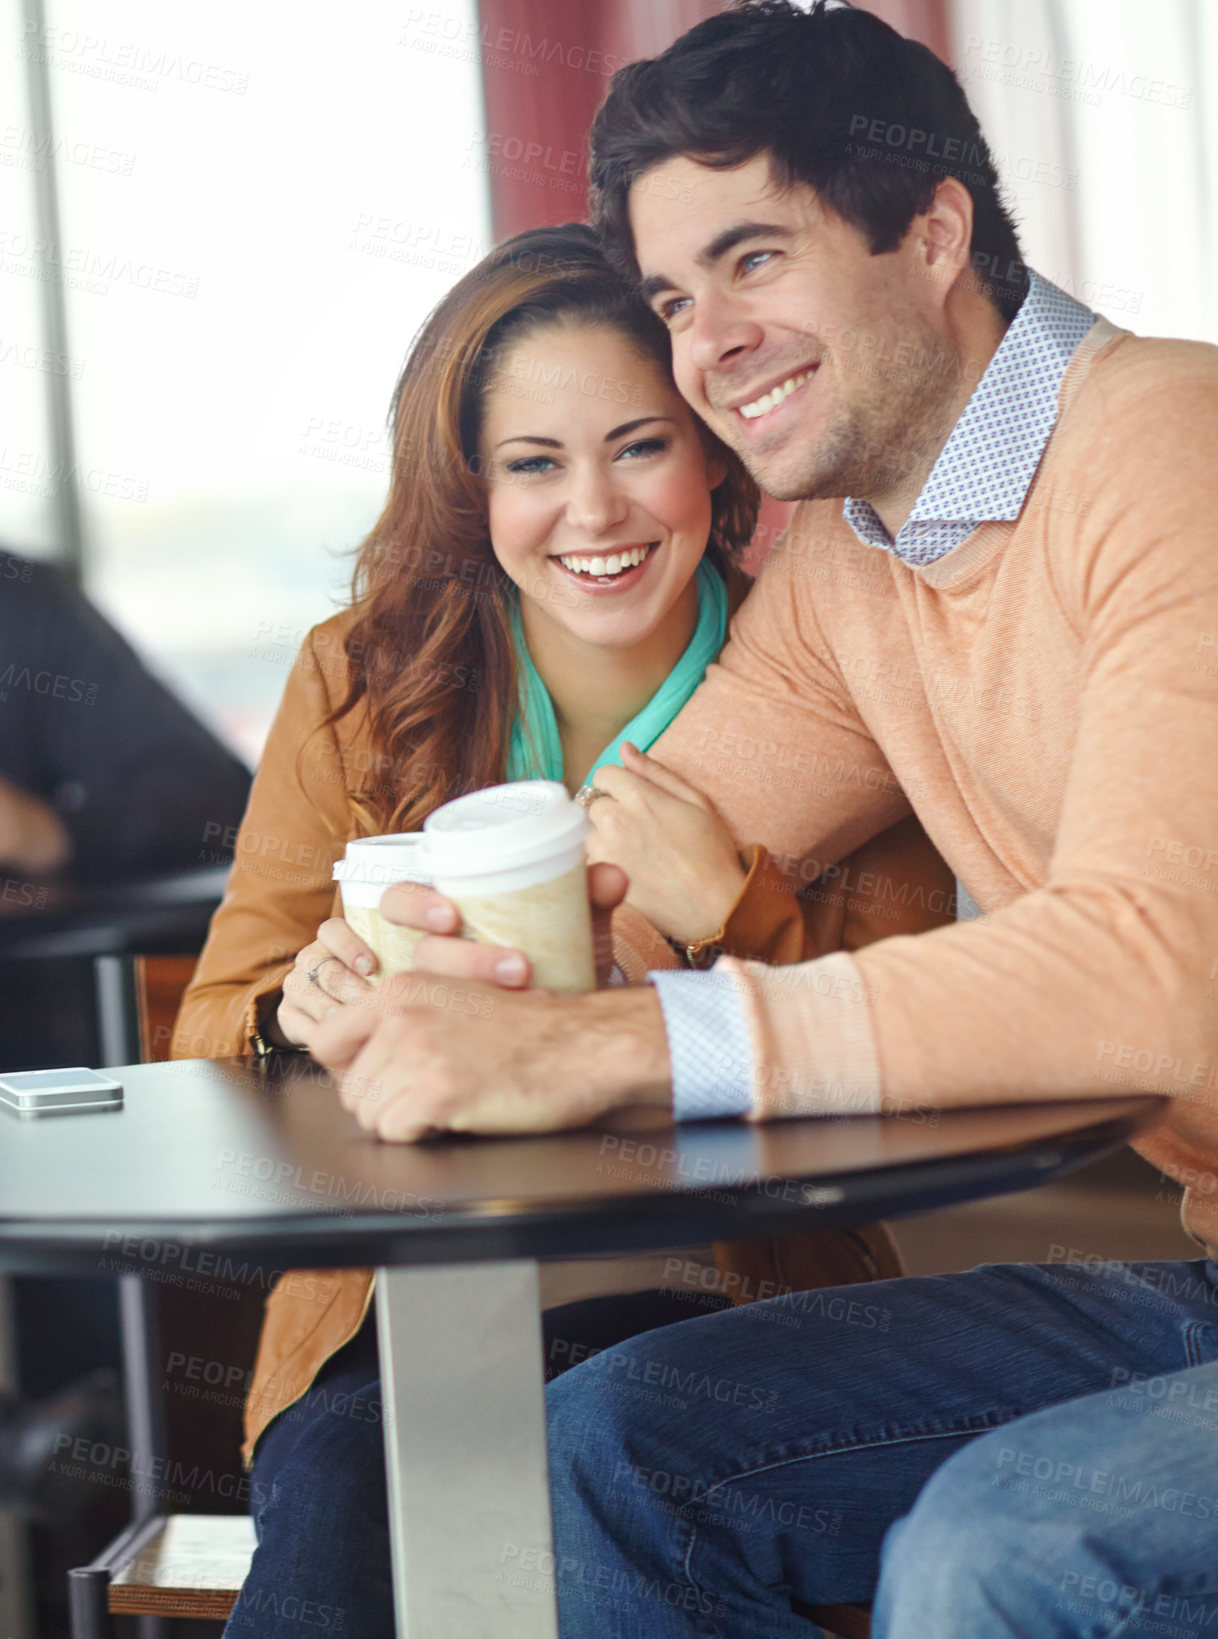 Buy stock photo A happy young couple on a date in a coffee shop